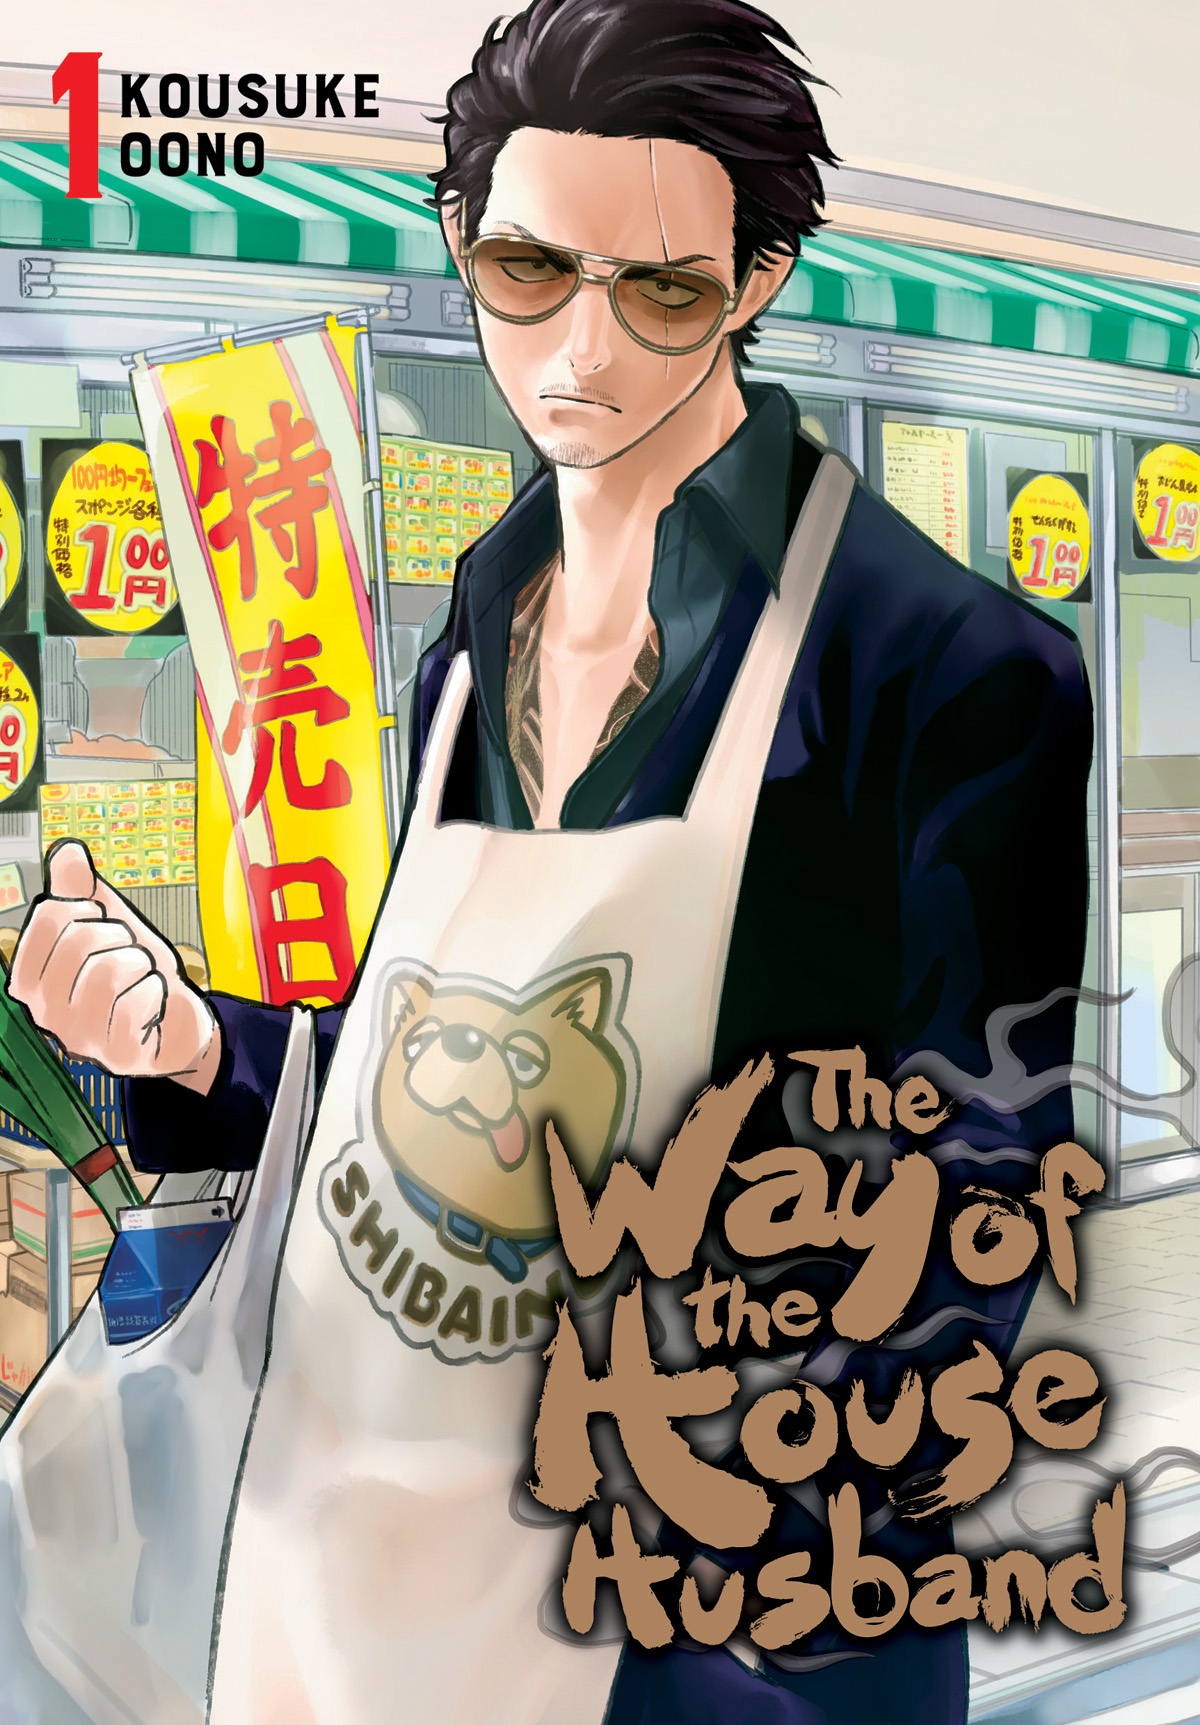 VIZ. The Official Website for The Way of the Househusband